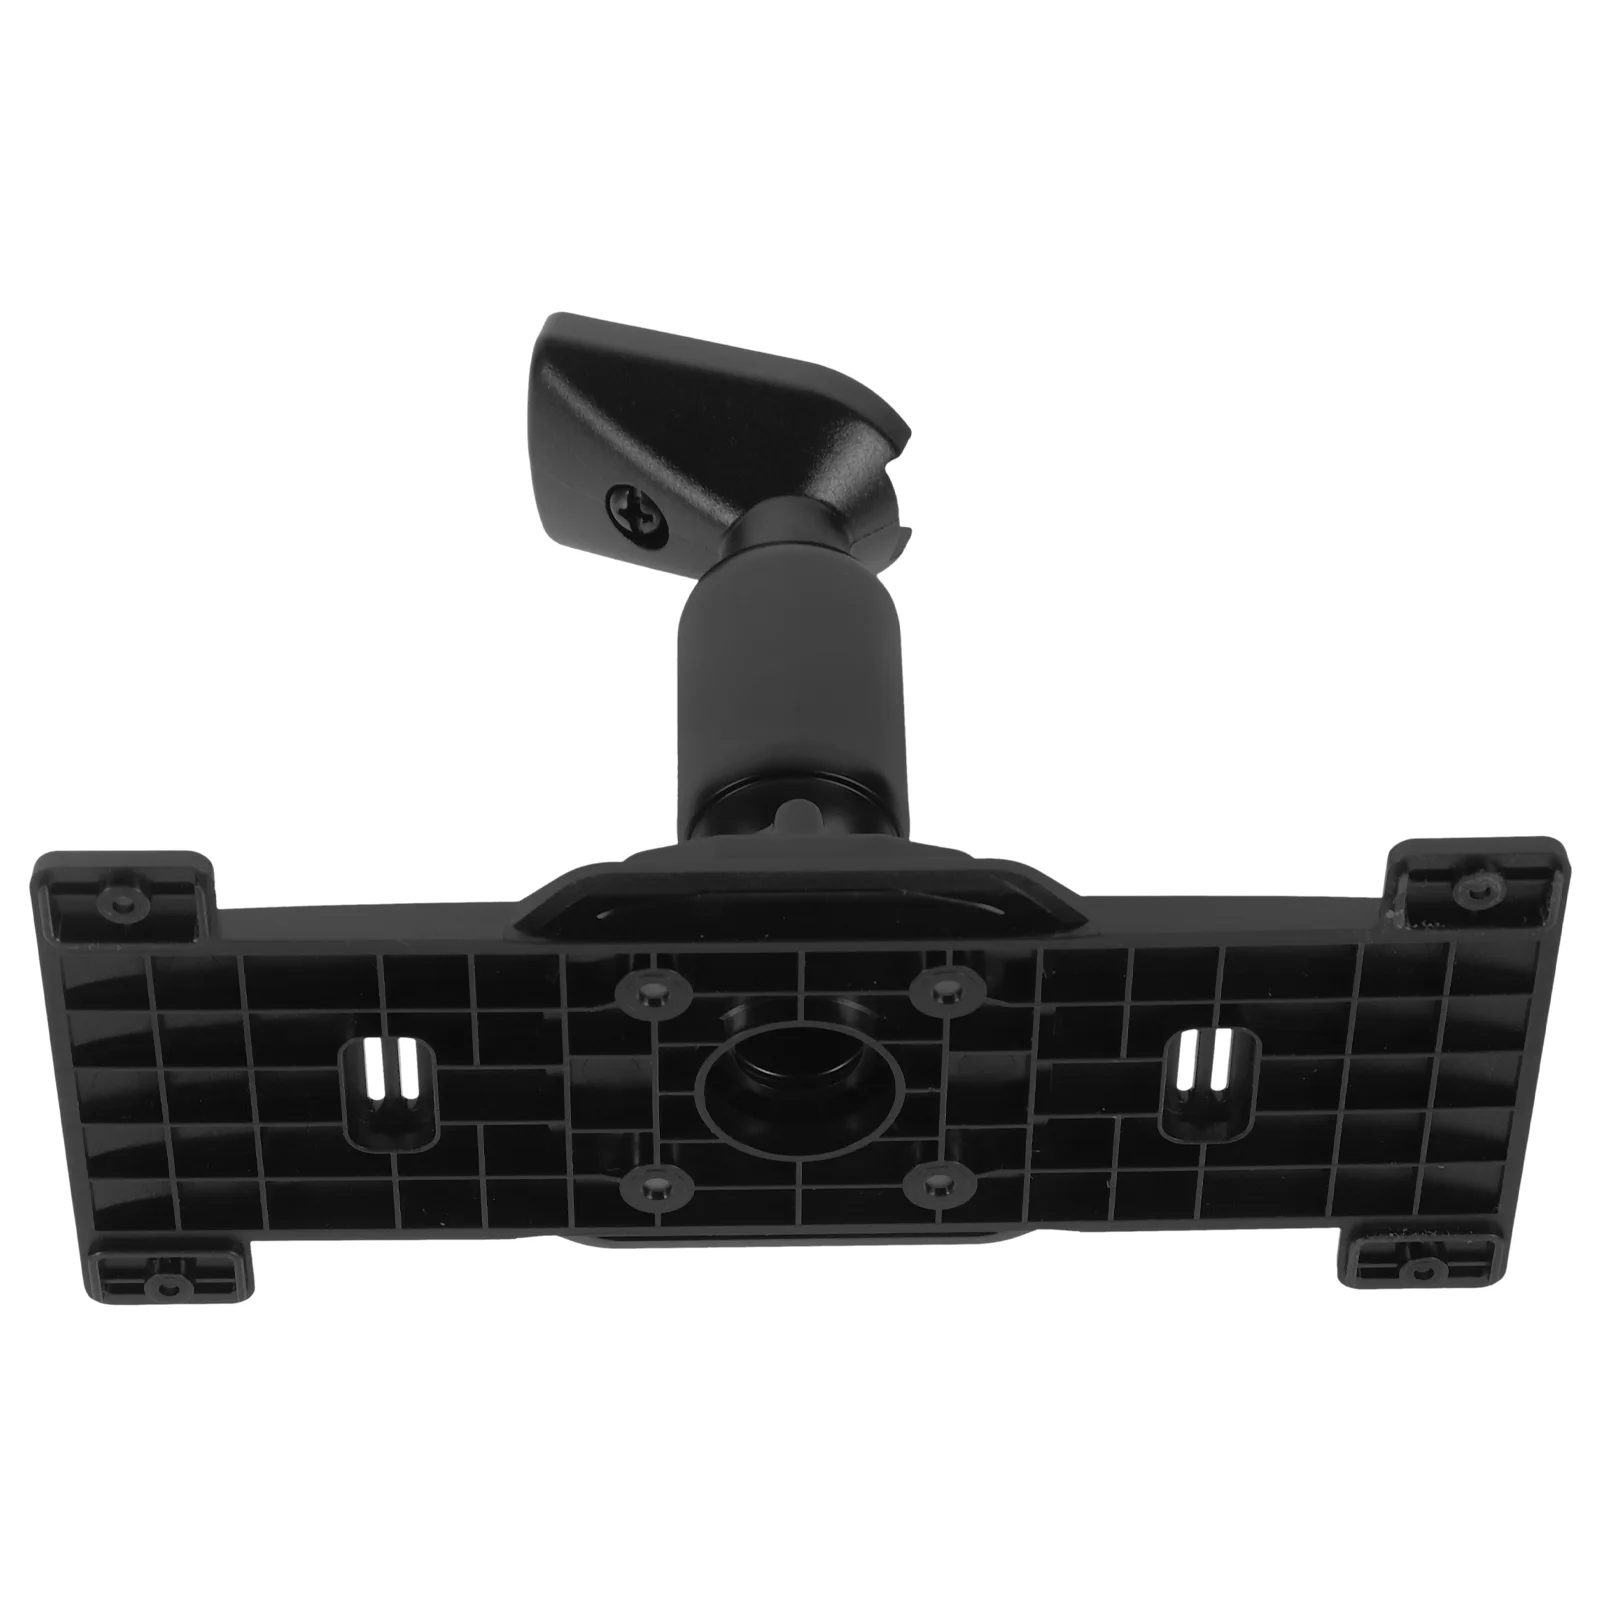 

Mirror Mount For Dash Cam Rear View Stand Holder Vehicle Driving Recorder Mounting Kit